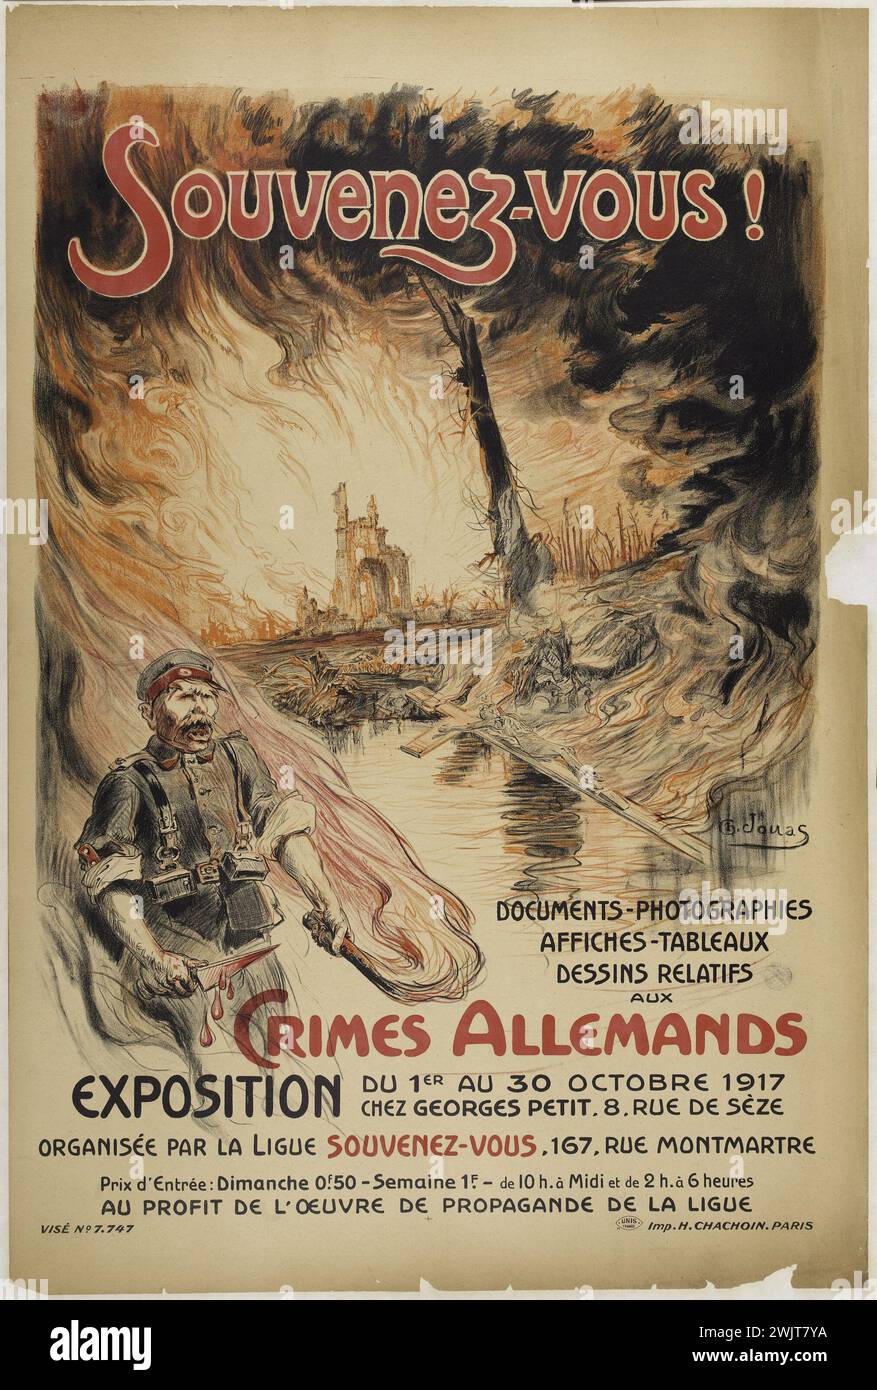 Charles Jouas. 'Remember! Documents-photographs, posters-tableau, drawings relating to German crimes, exhibition of October 1, 1917 at Georges Petit, 8 rue de Seze'. Color lithography. 1917. Paris, Carnavalet museum. 74199-21 8 rue de Seze, poster, German crime, document, exhibition, war 14-18, war 1914-1918, color lithography, first world war, photography, soldier, souvenir, painting, fire Stock Photo